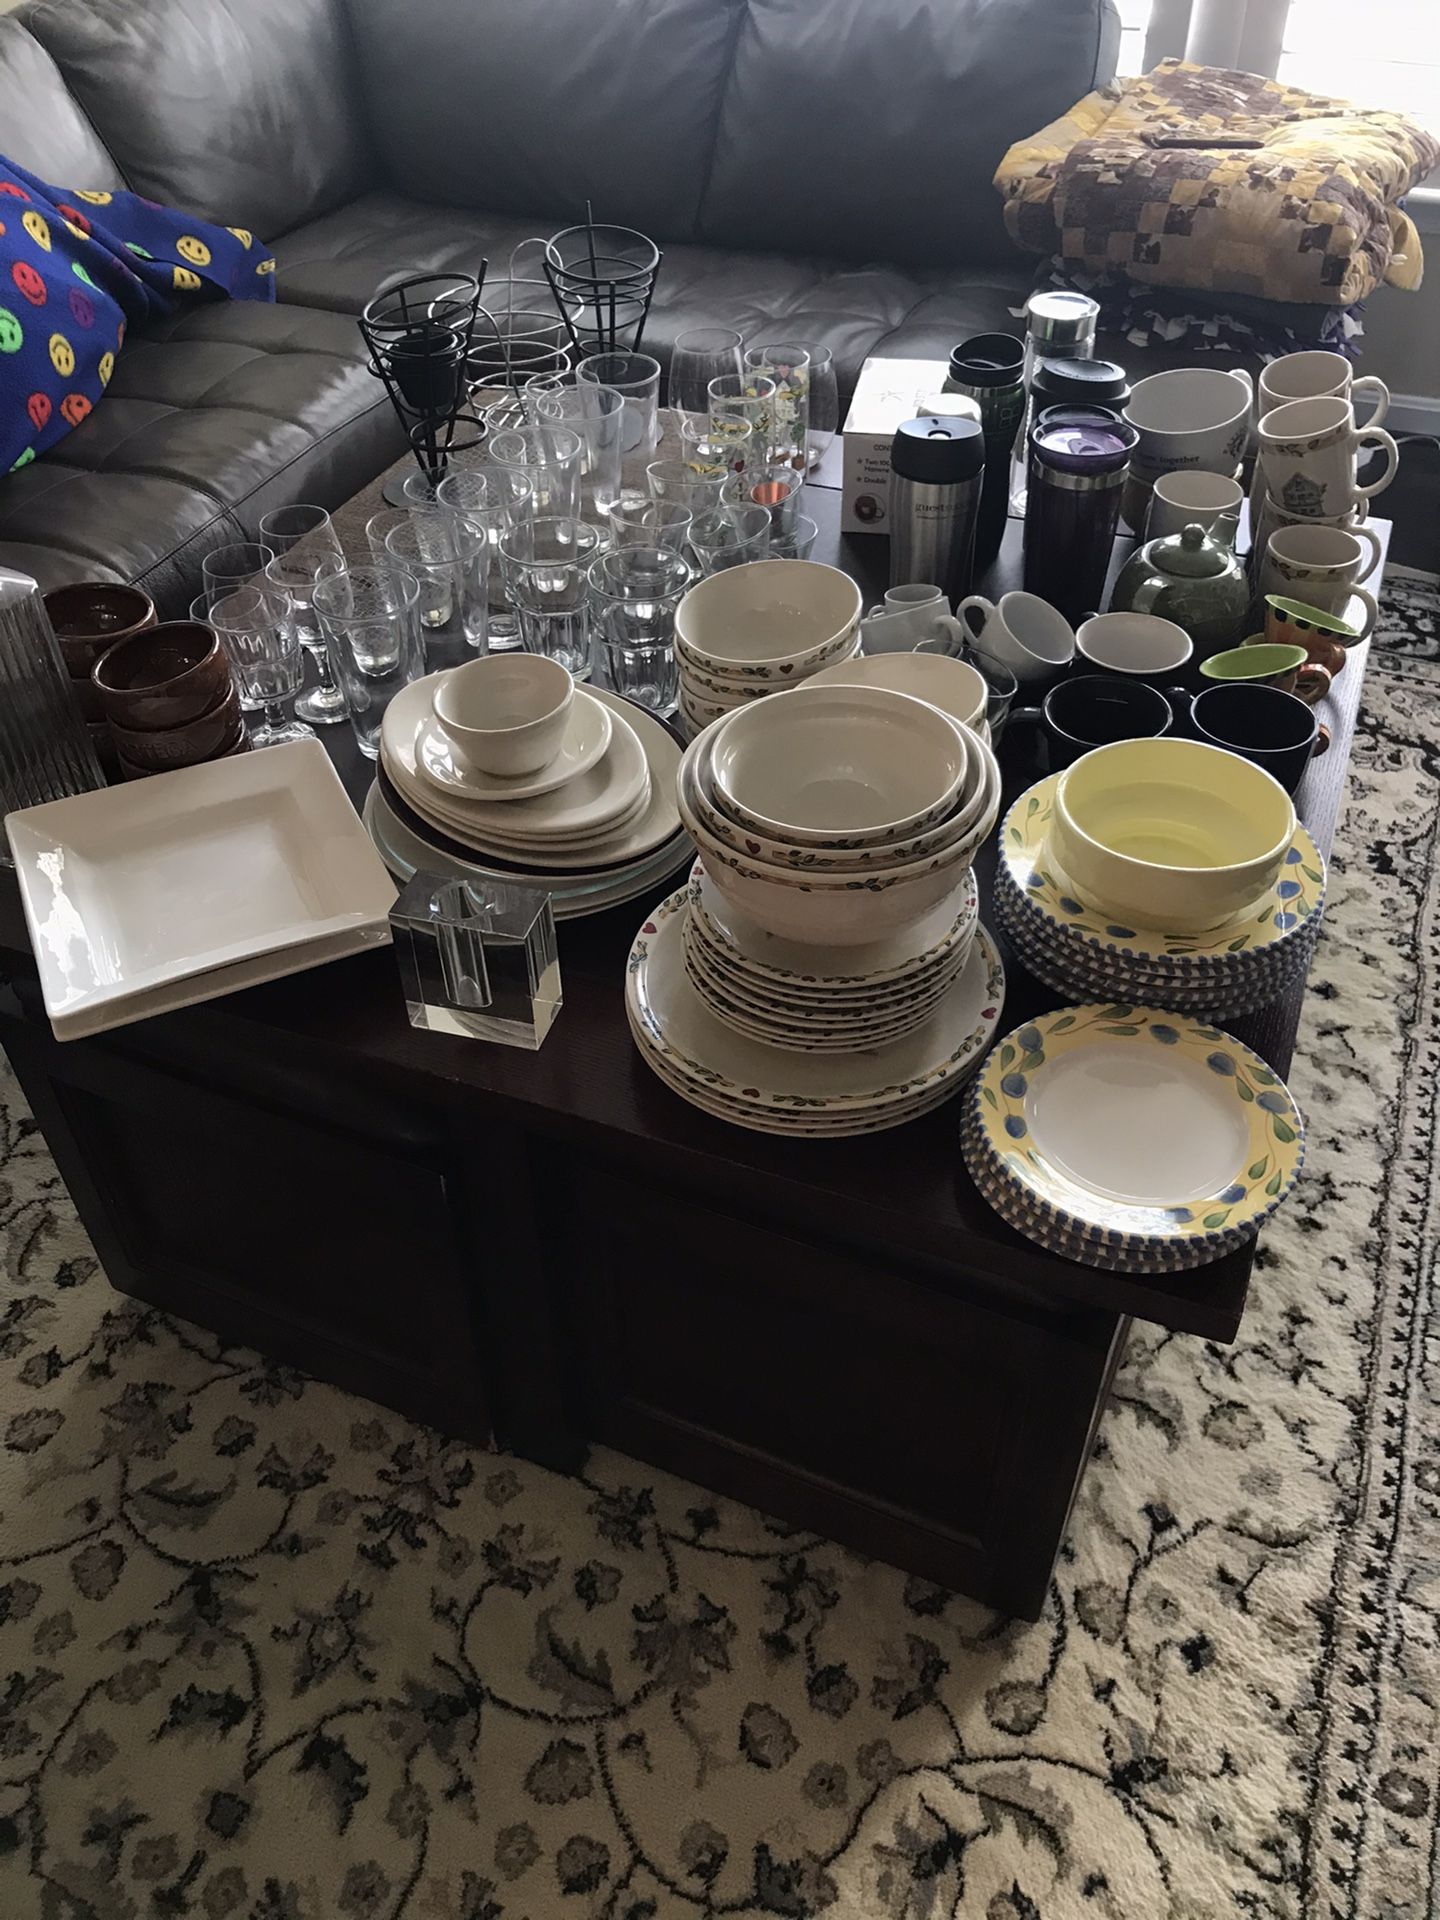 Large selection of various chinaware,glassware, and others.